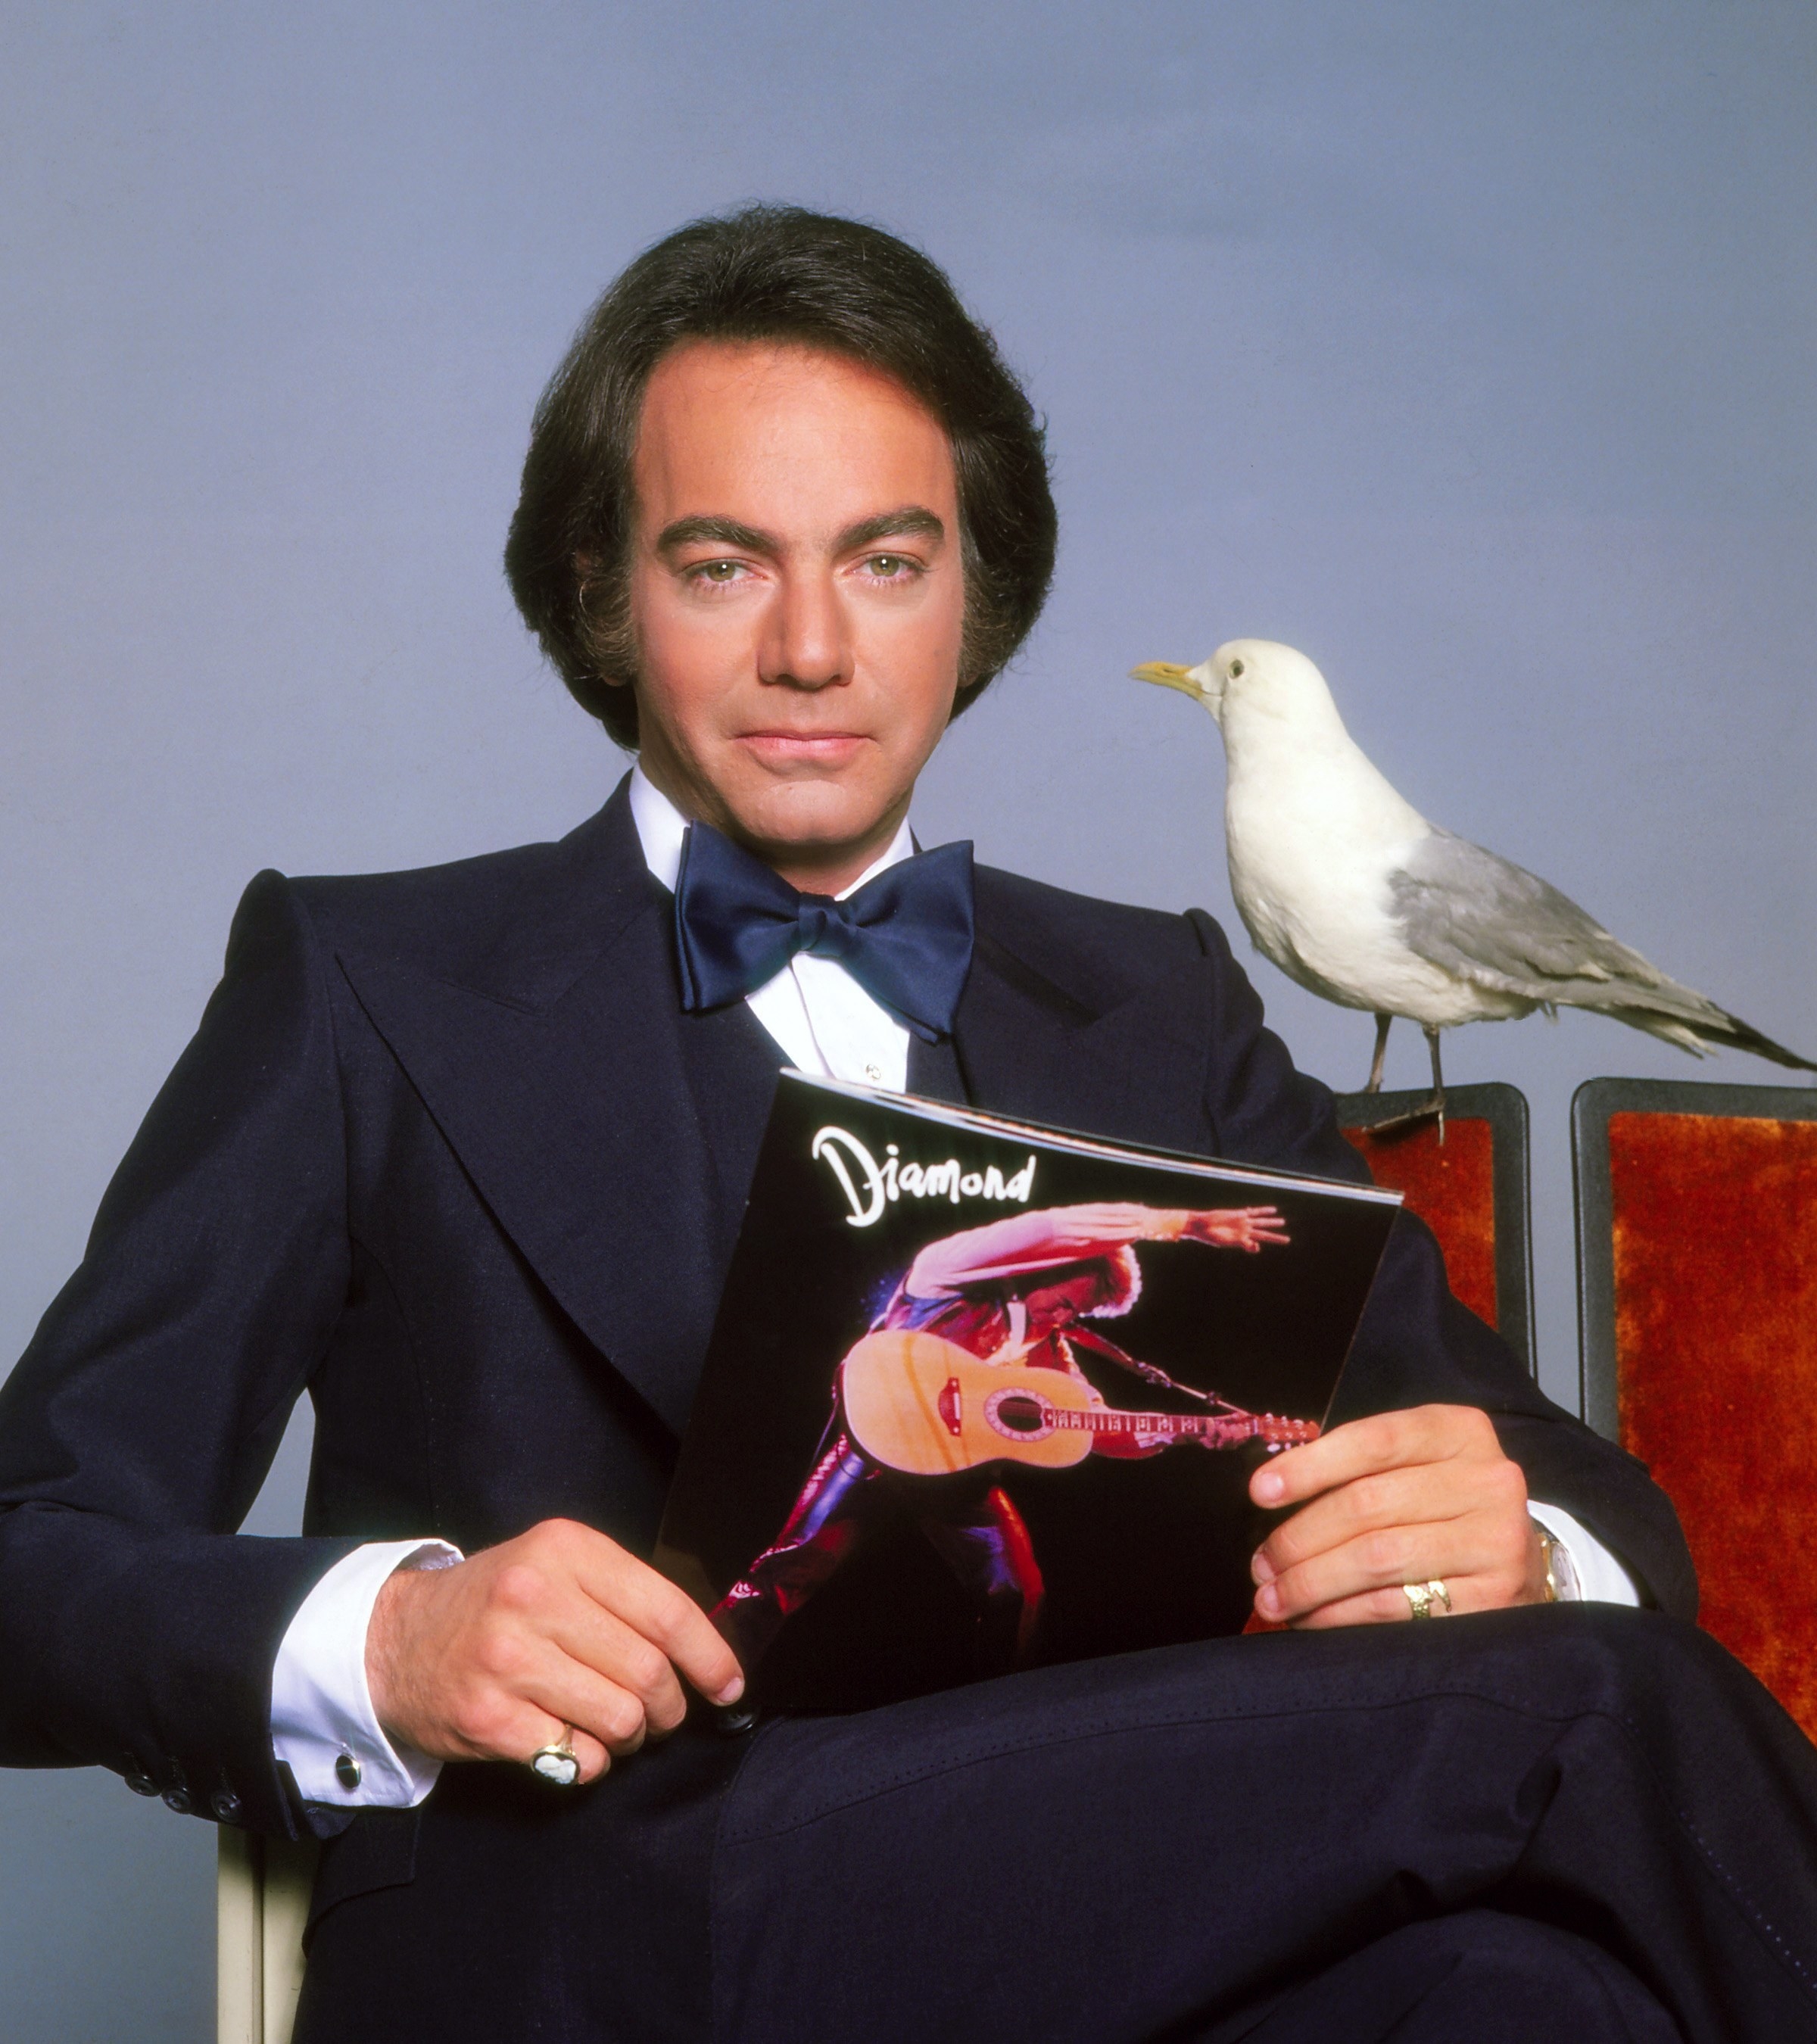 he&#x27;s sitting in a suit and has a seagull on him